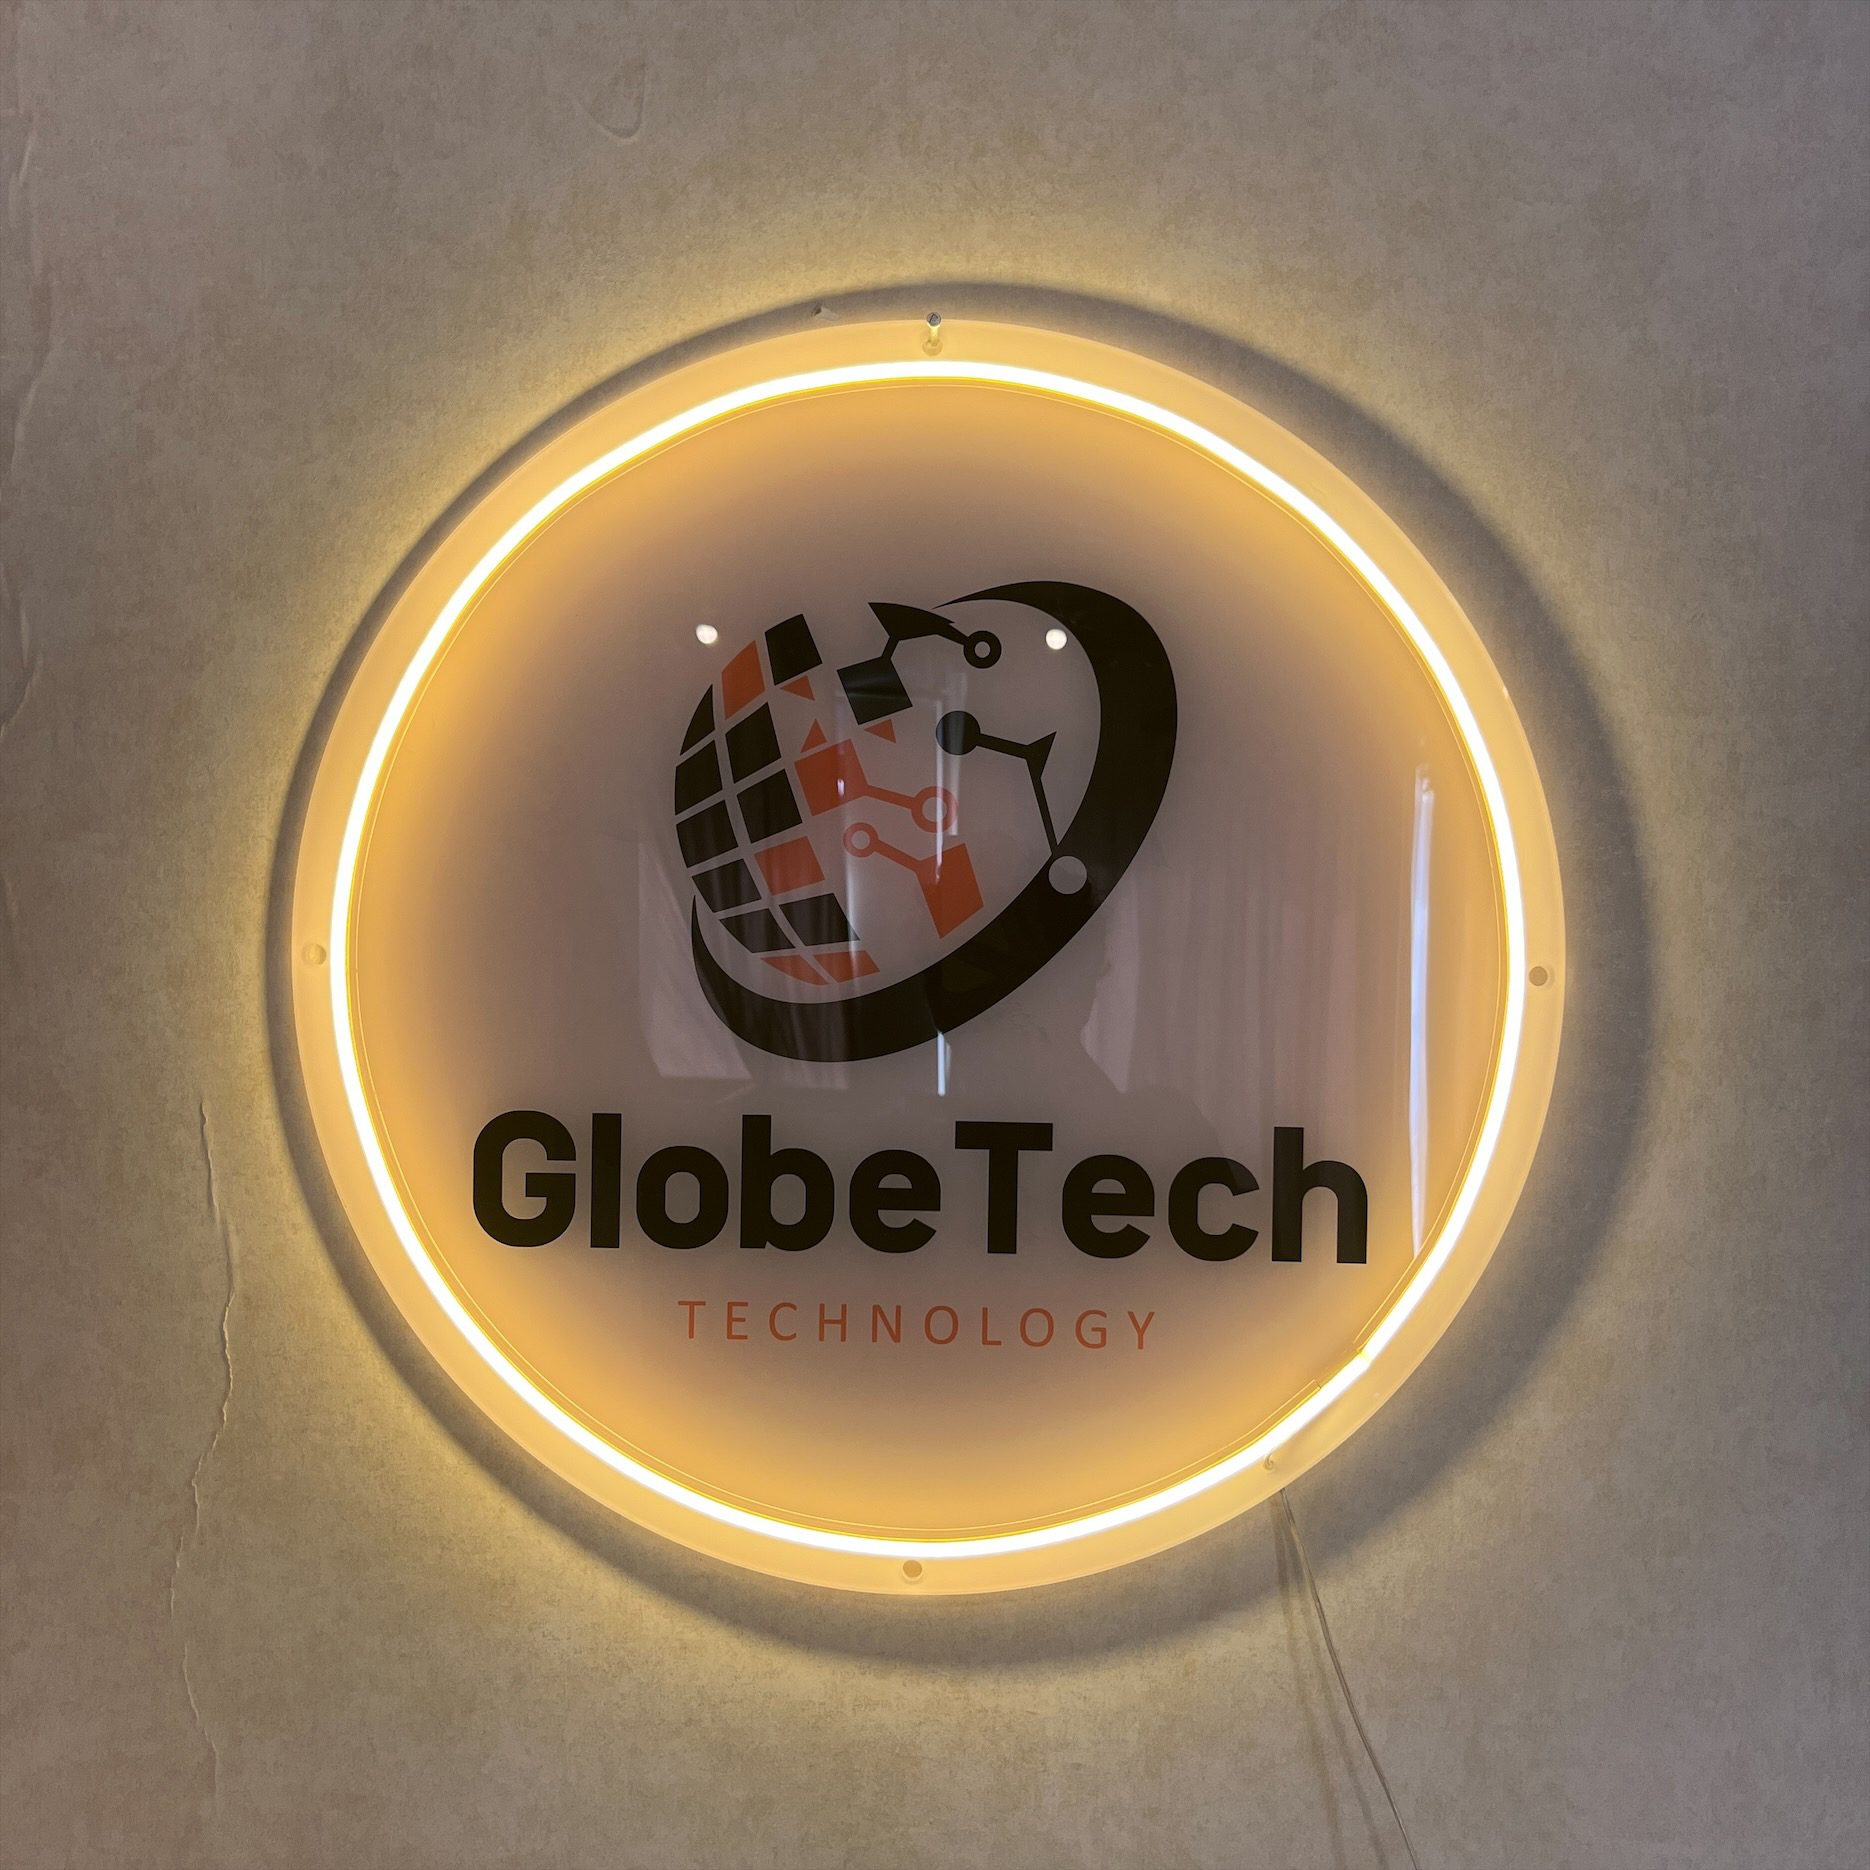 Globe Tech UV printed sign made by oNeonCrafts